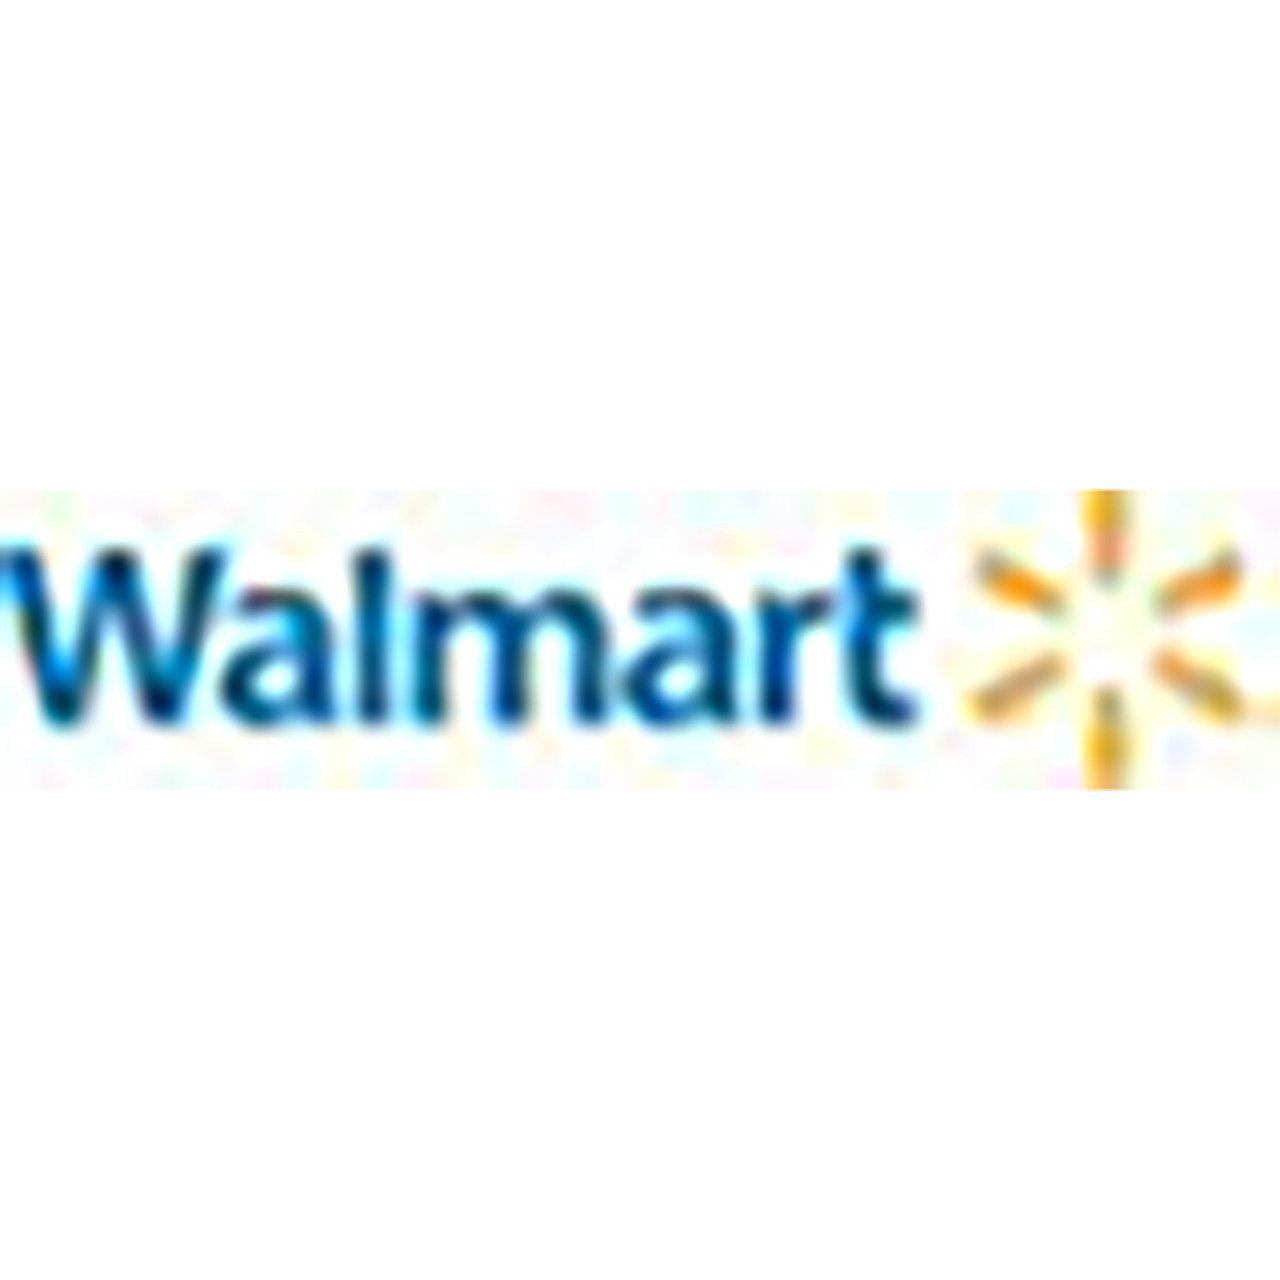 Wallmart Pictures of S Logo - Walmart Logo Stencil | Stop-Painting.com